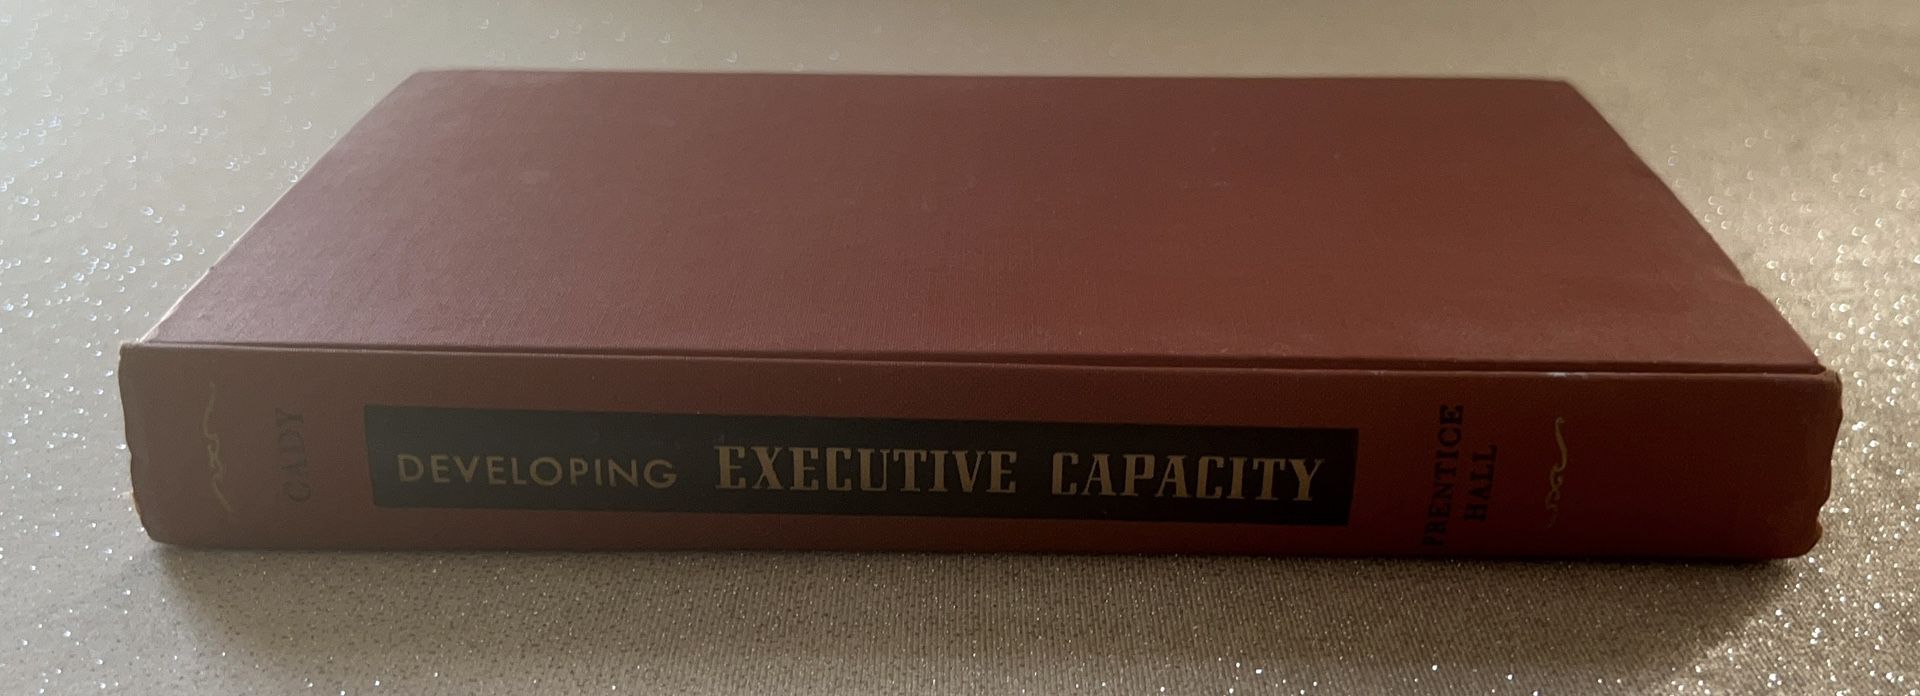 Developing Executive Capacity by Edwin Laird Cady